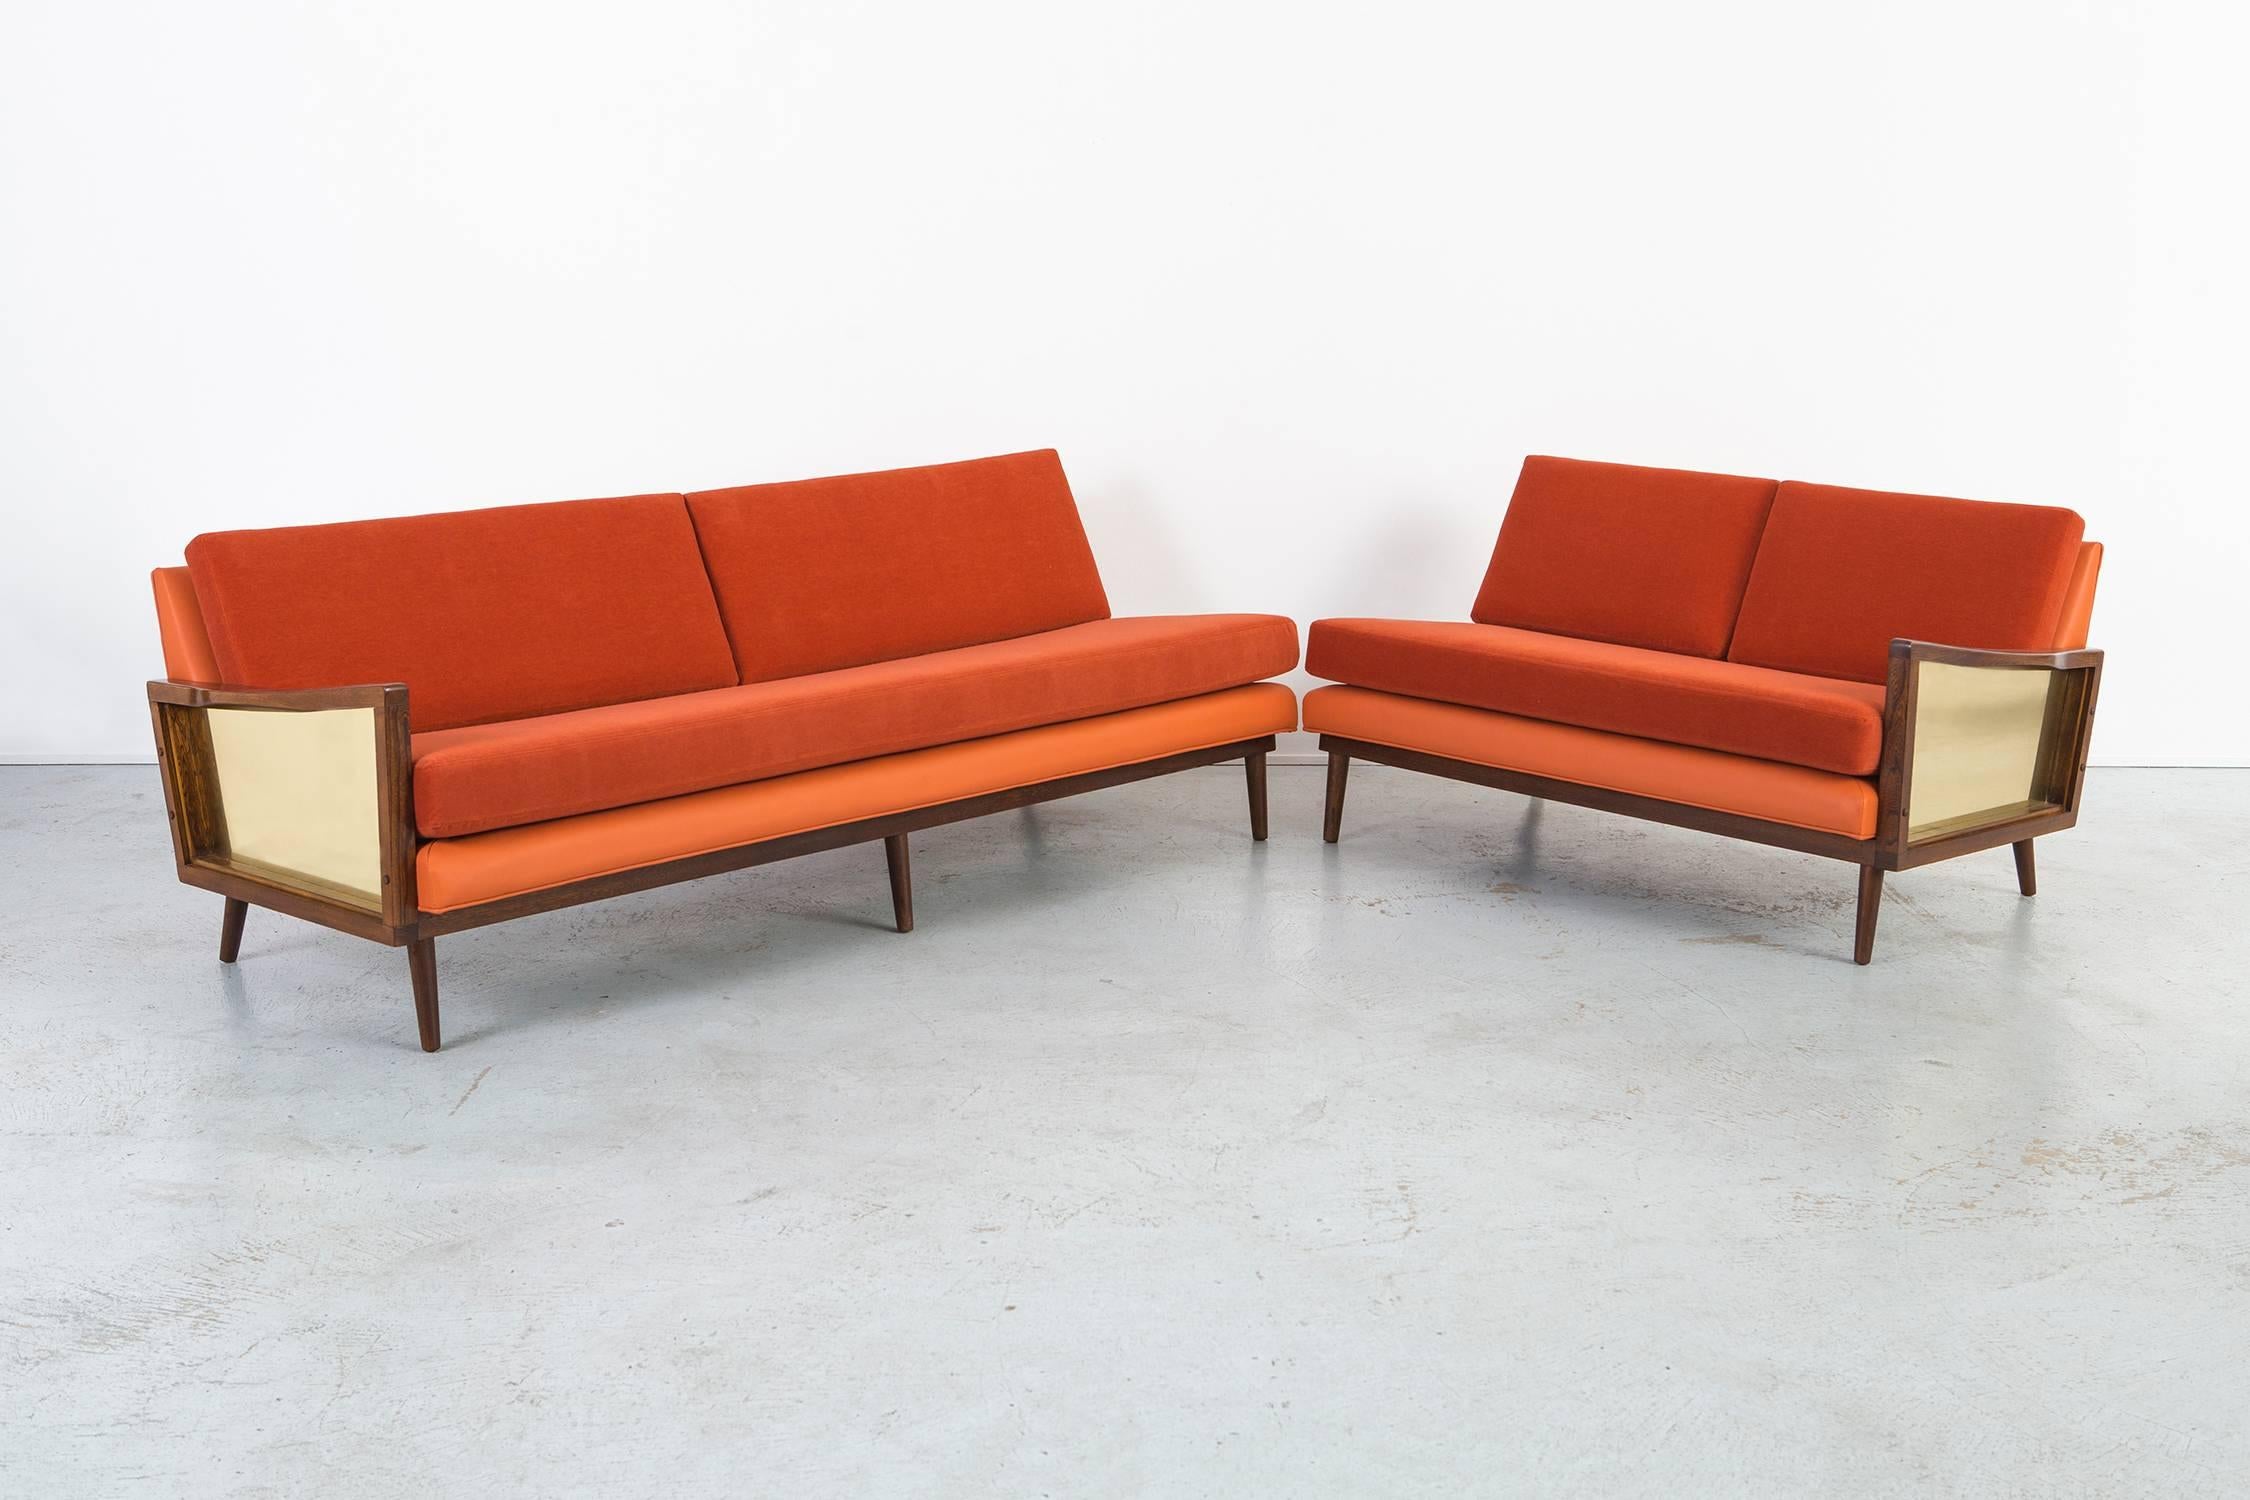 American Mid-Century Modern Lawrence Peabody Sectional Sofa